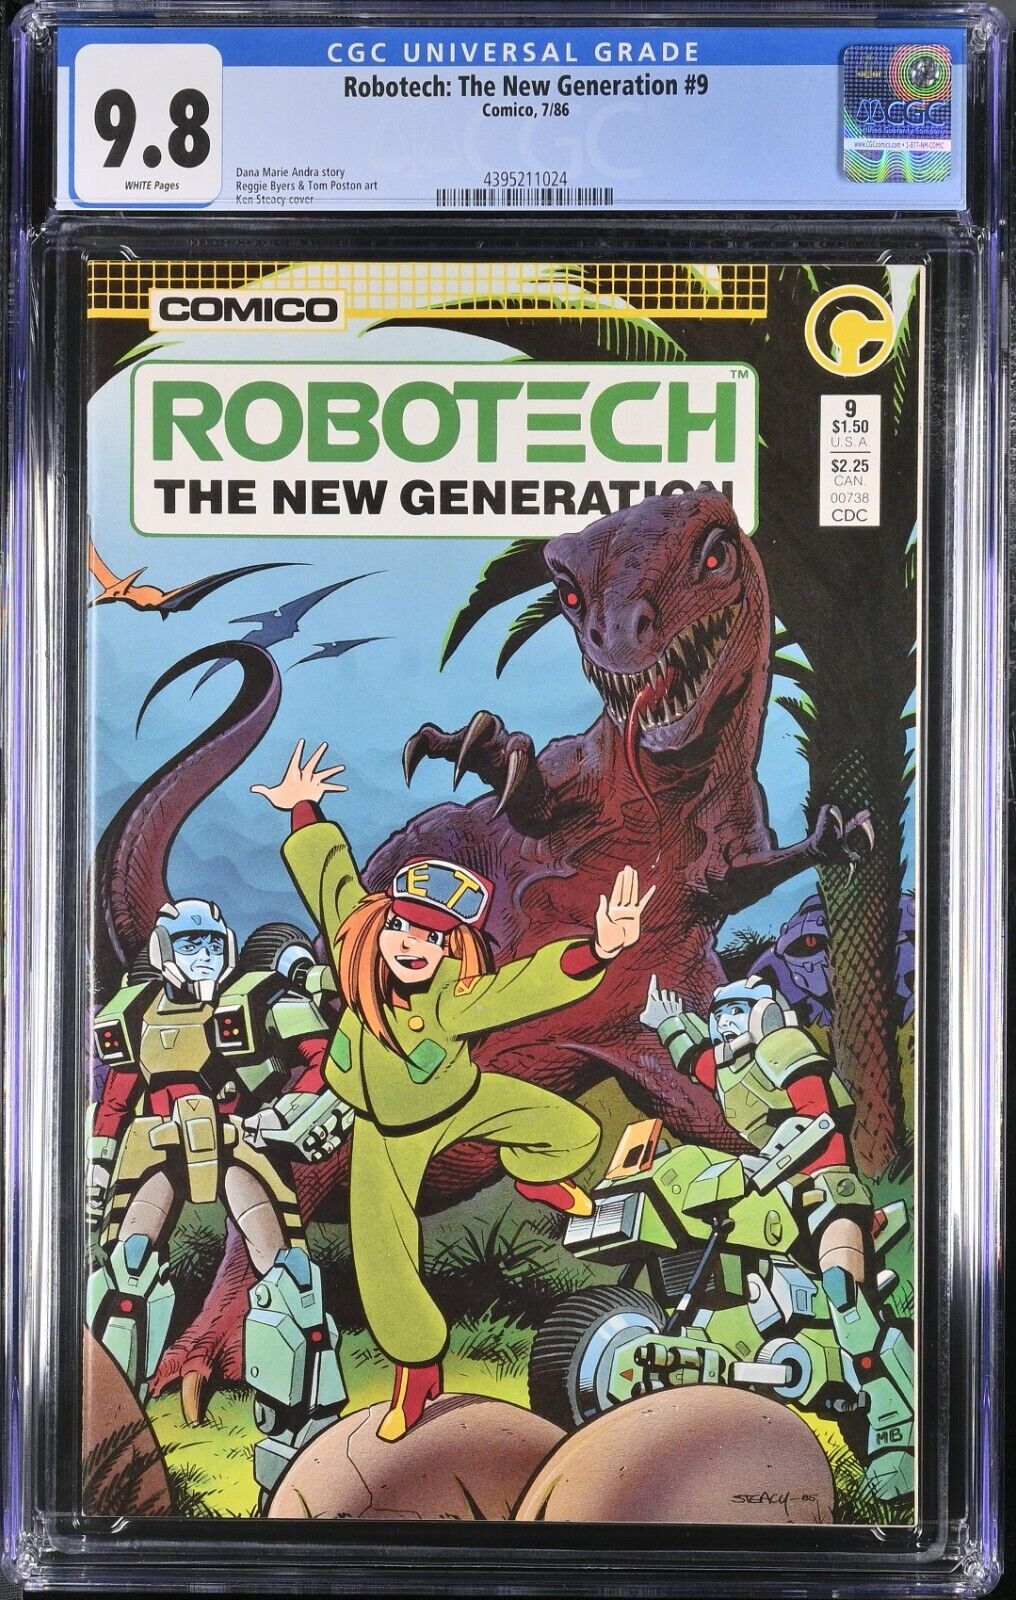 ROBOTECH: THE NEW GENERATION #9 - CGC 9.8 - WP - NM/MT - DINOSAUR COVER